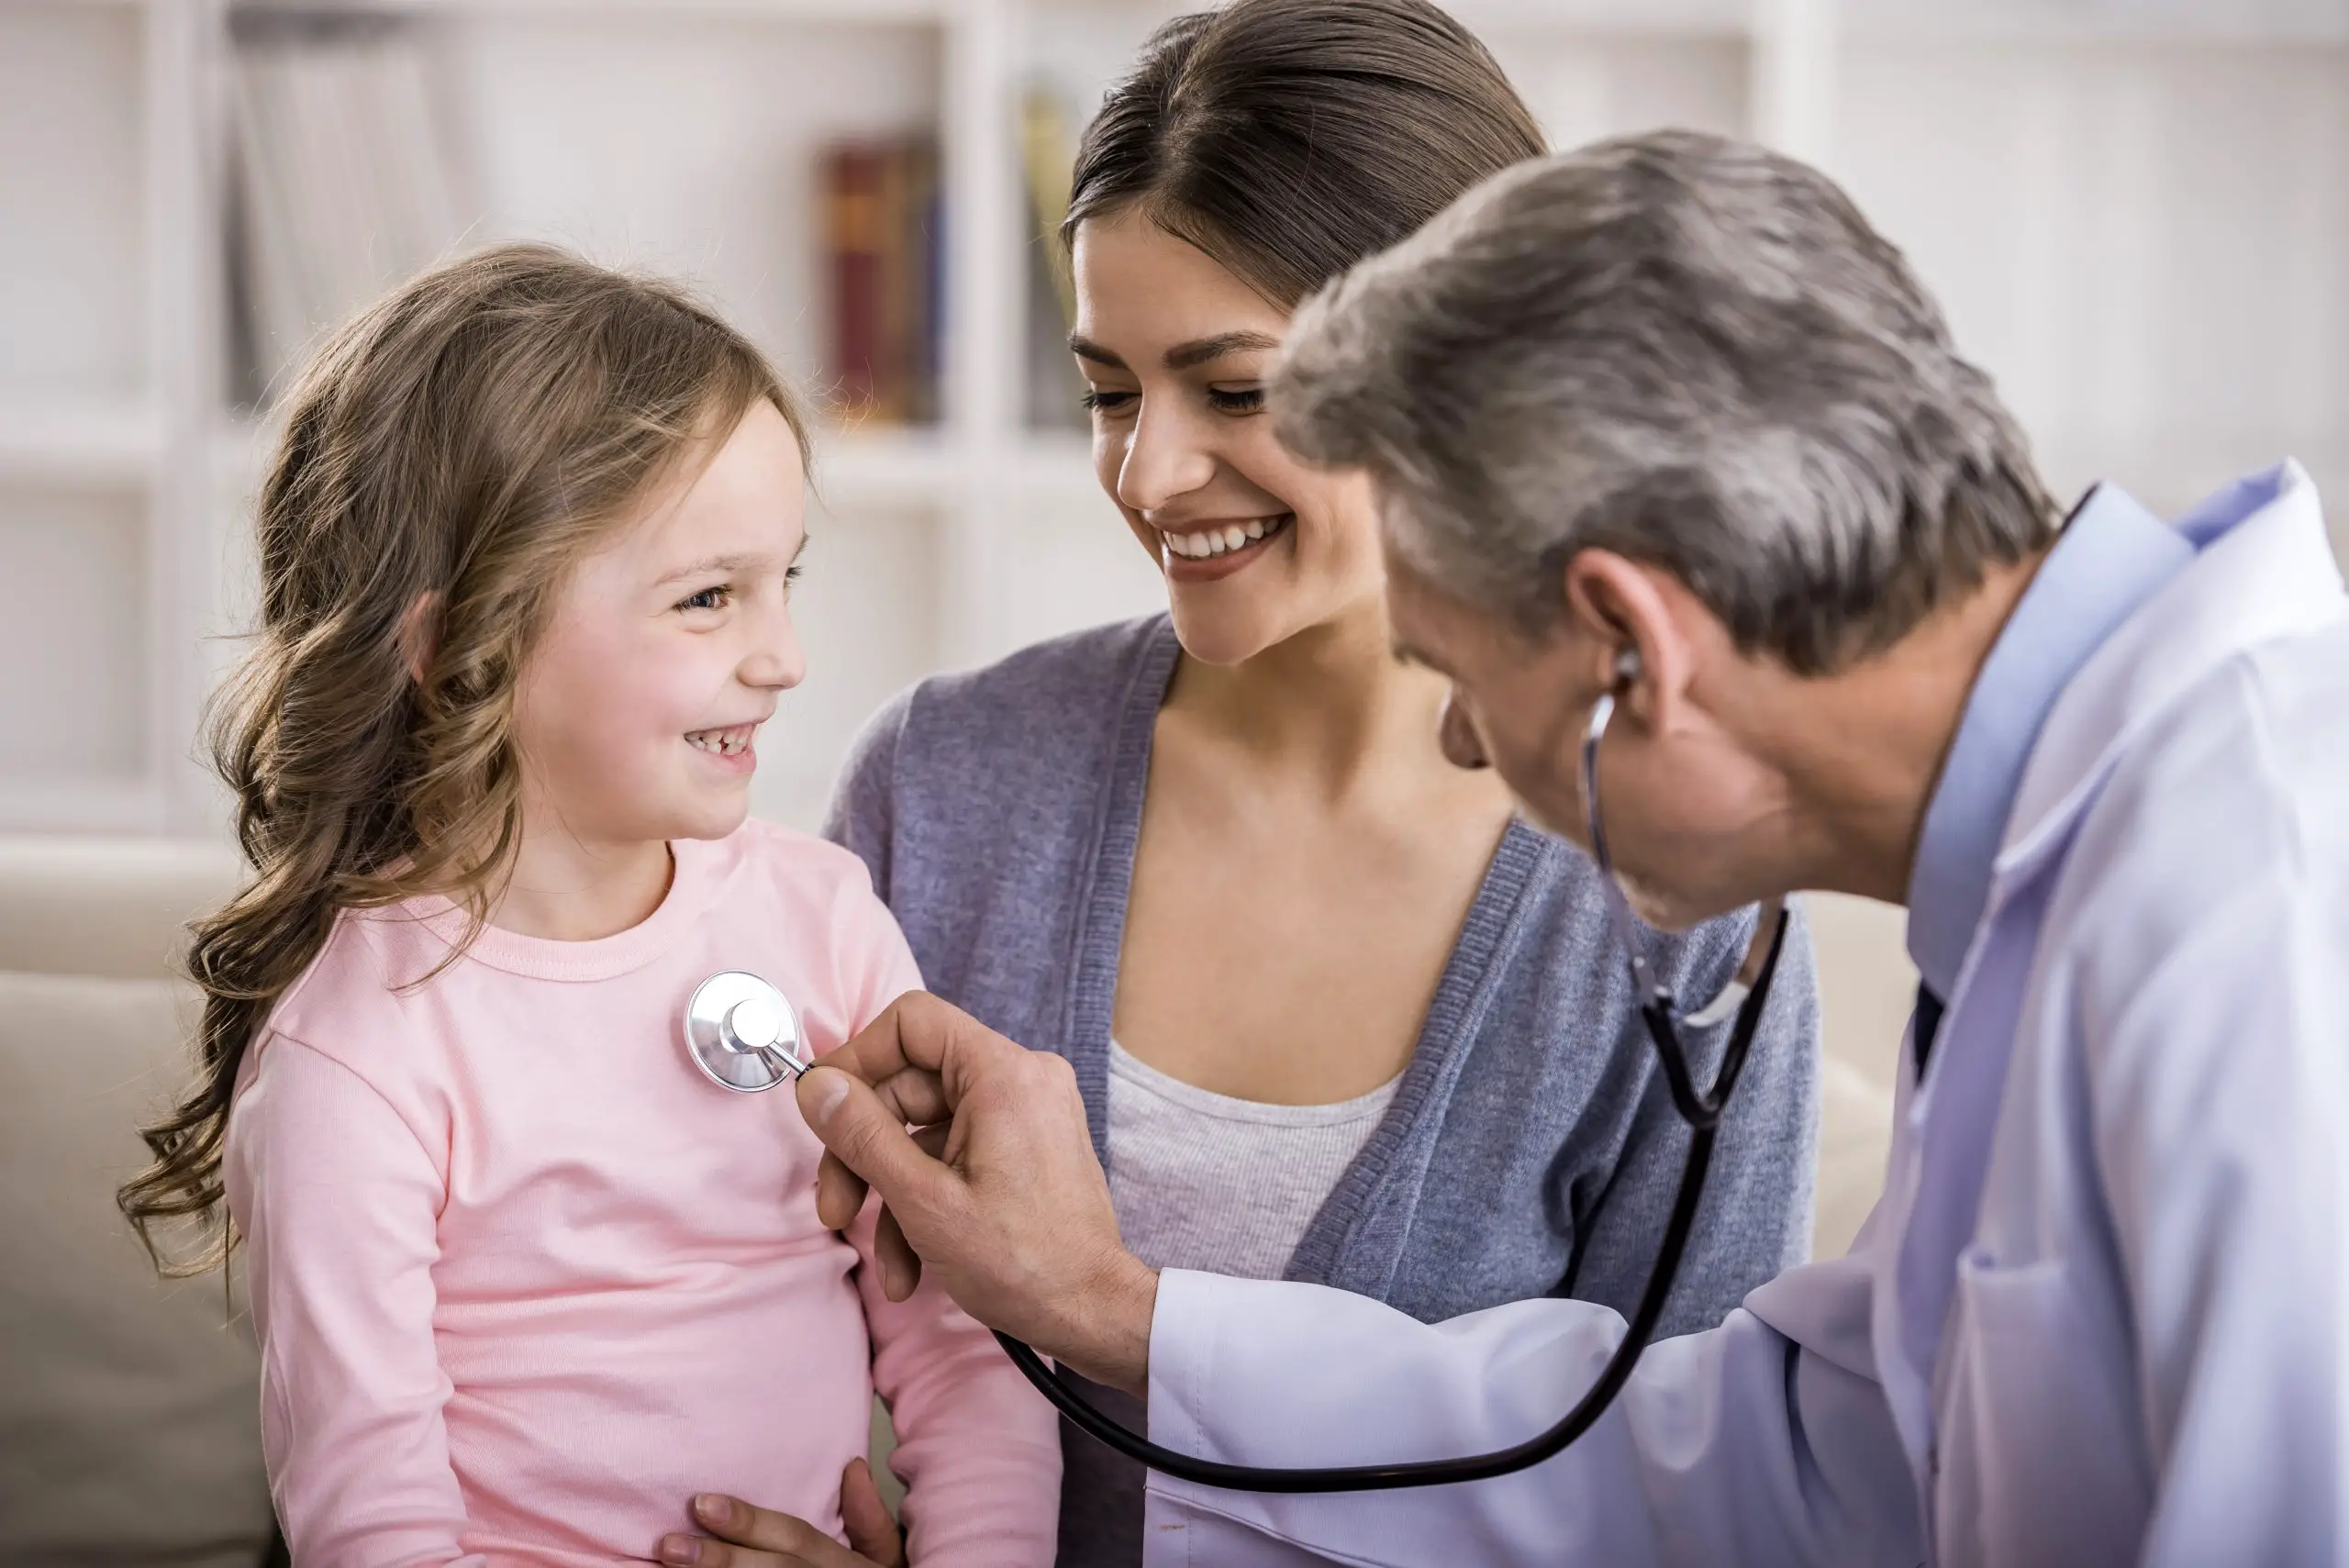 children's healthcare professional checks the heartbeat of smiling young girl in Germany